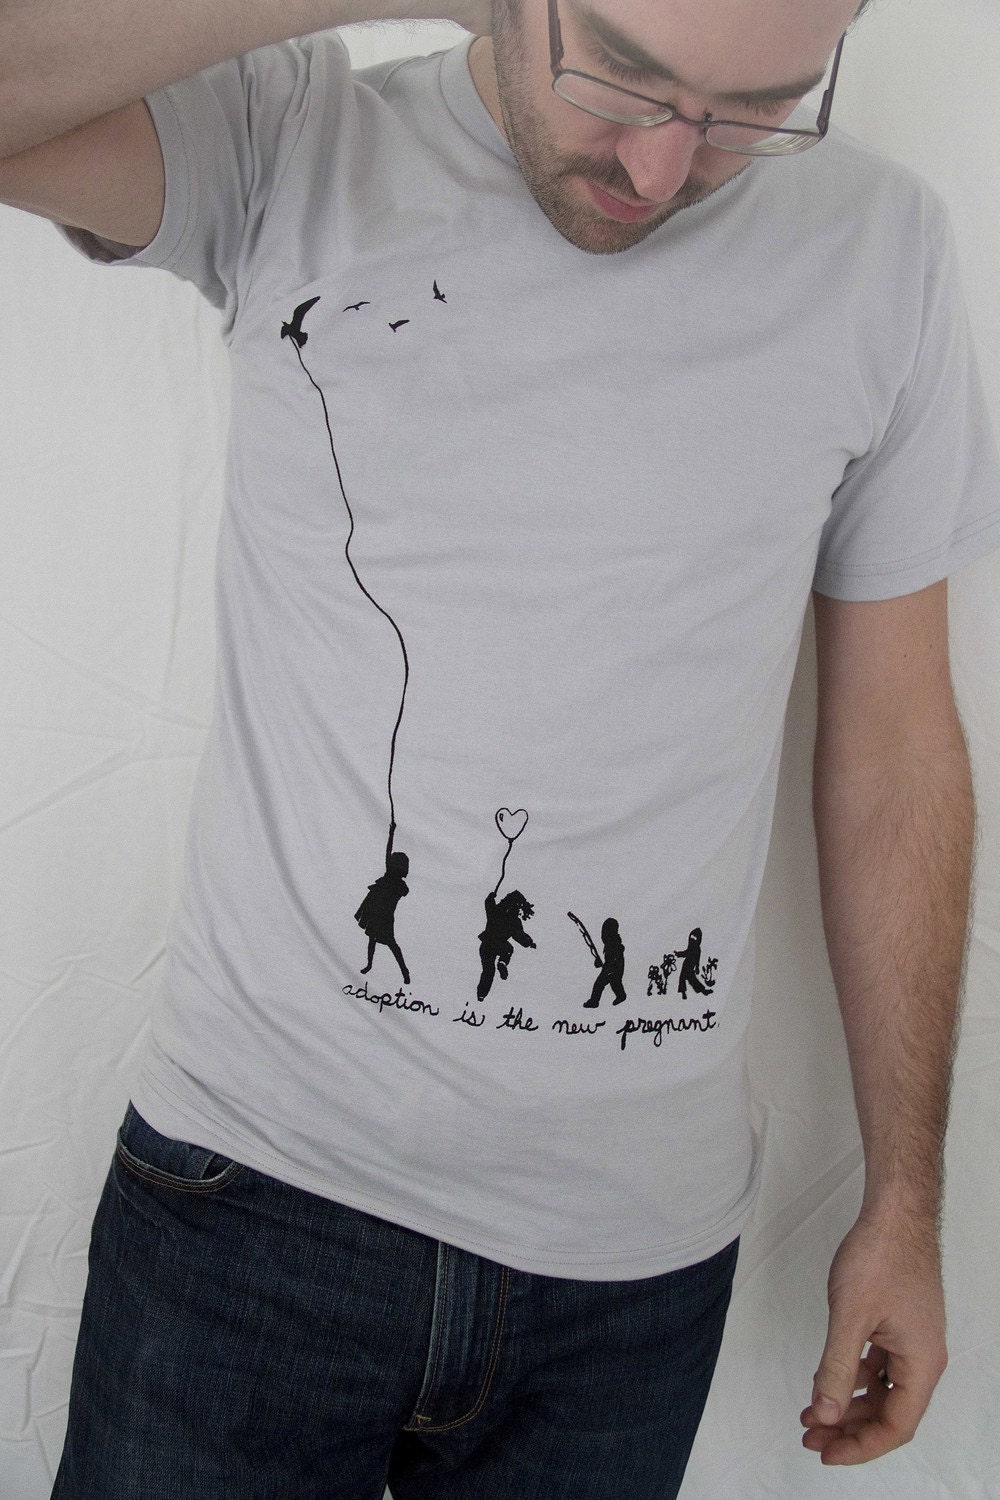 Silver Unisex TShirt "adoption is the new pregnant" - American Apparel XS/S/M/L/XL Free Tote Free S&H